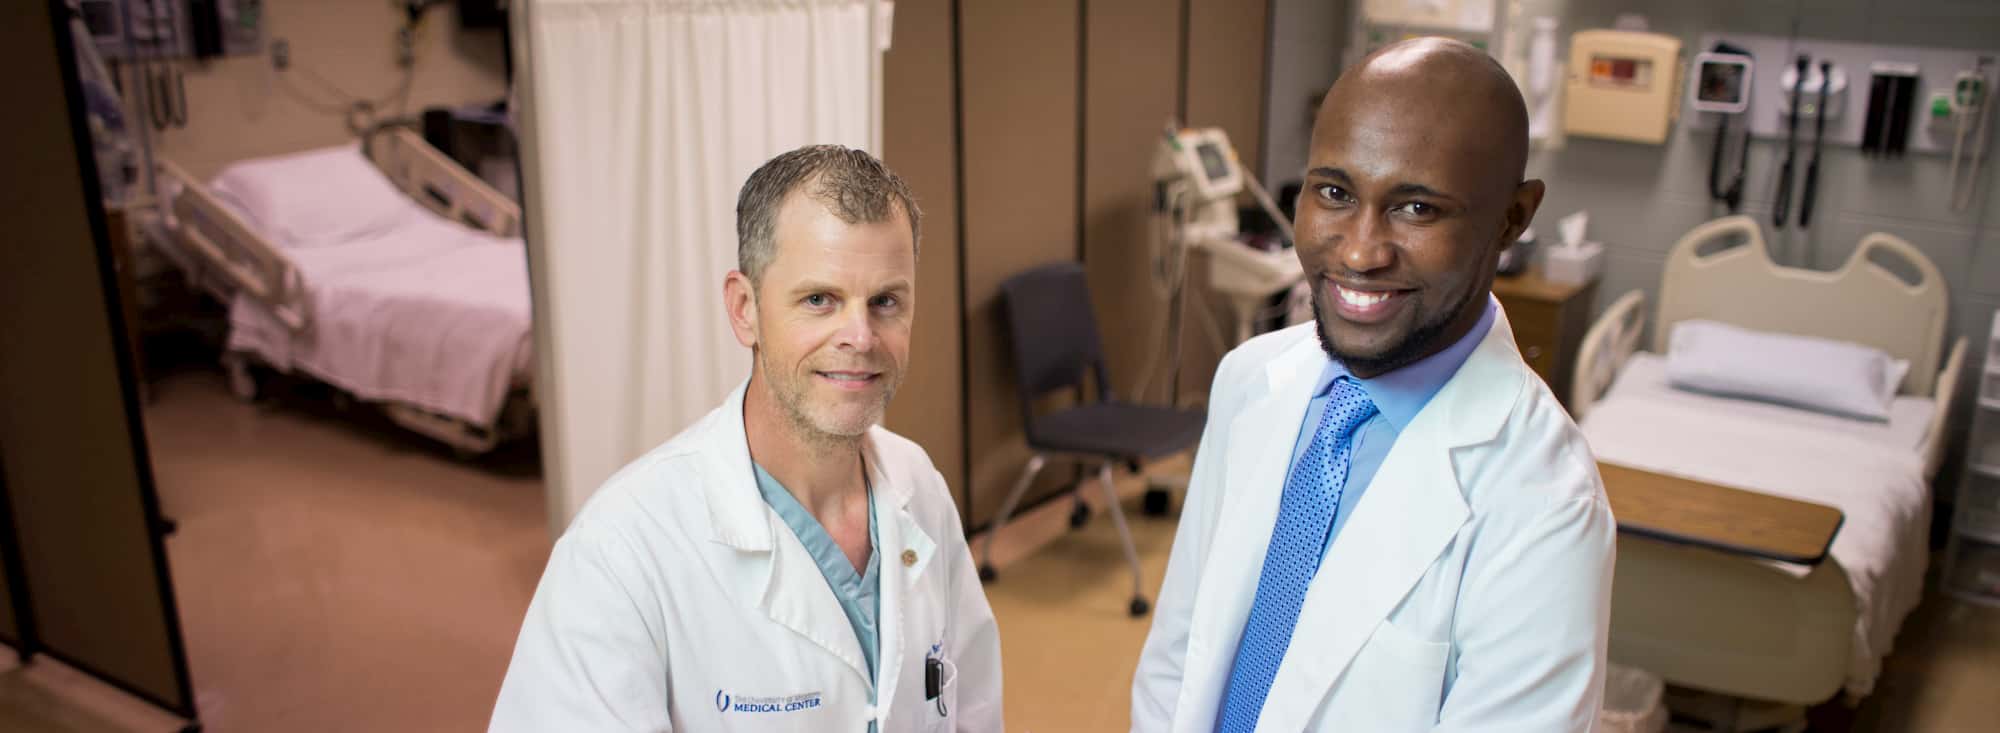 Two men standing in a clinical setting